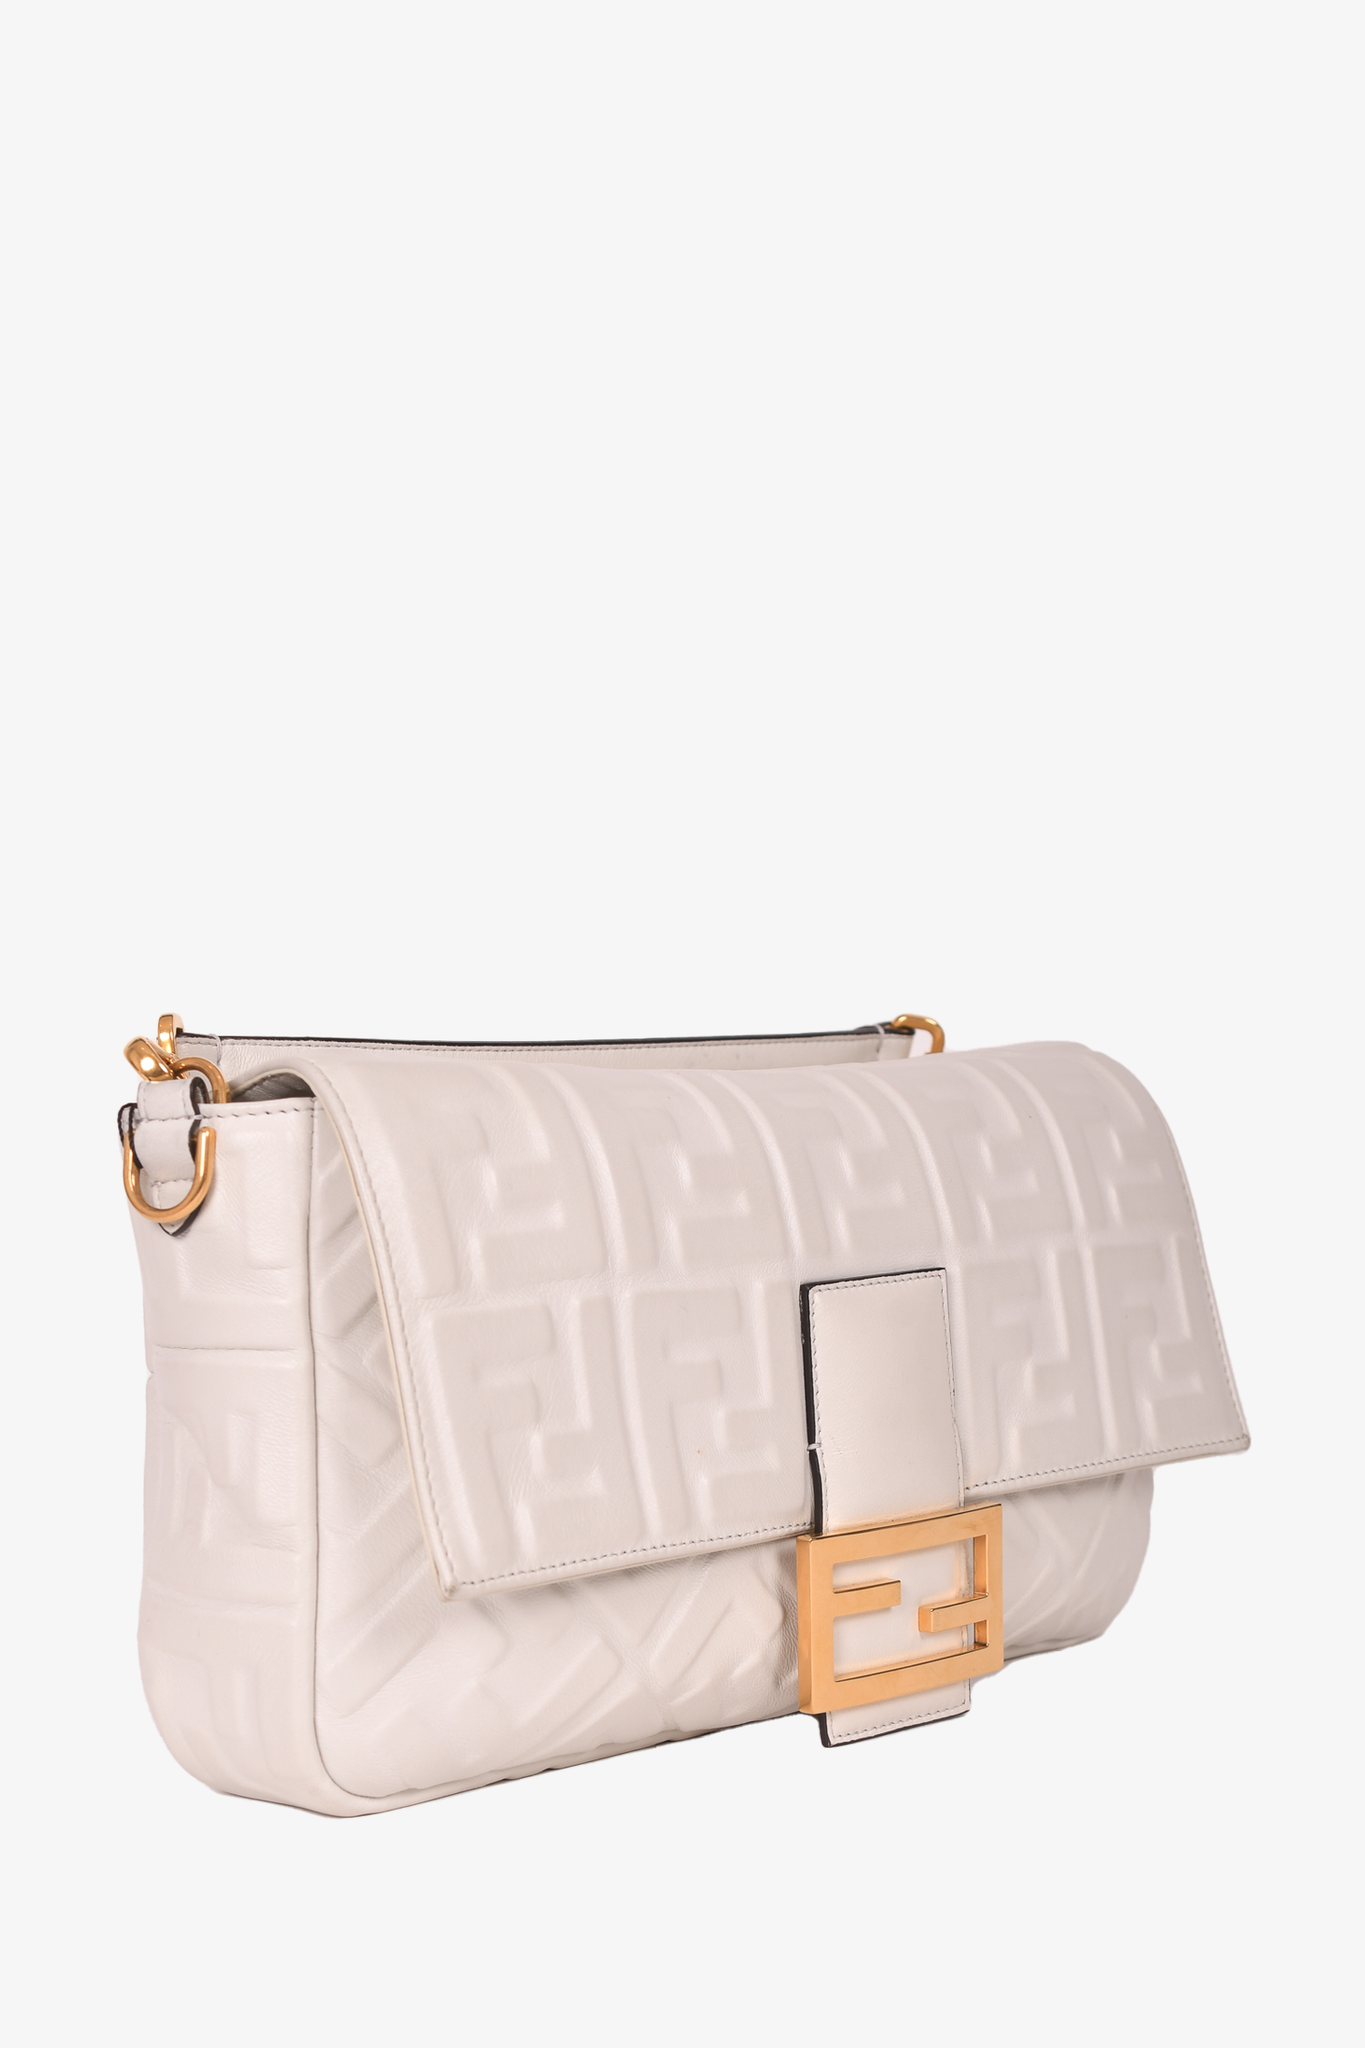 Fendi White Leather Embossed 'Nappa FF 1974' Large Baguette